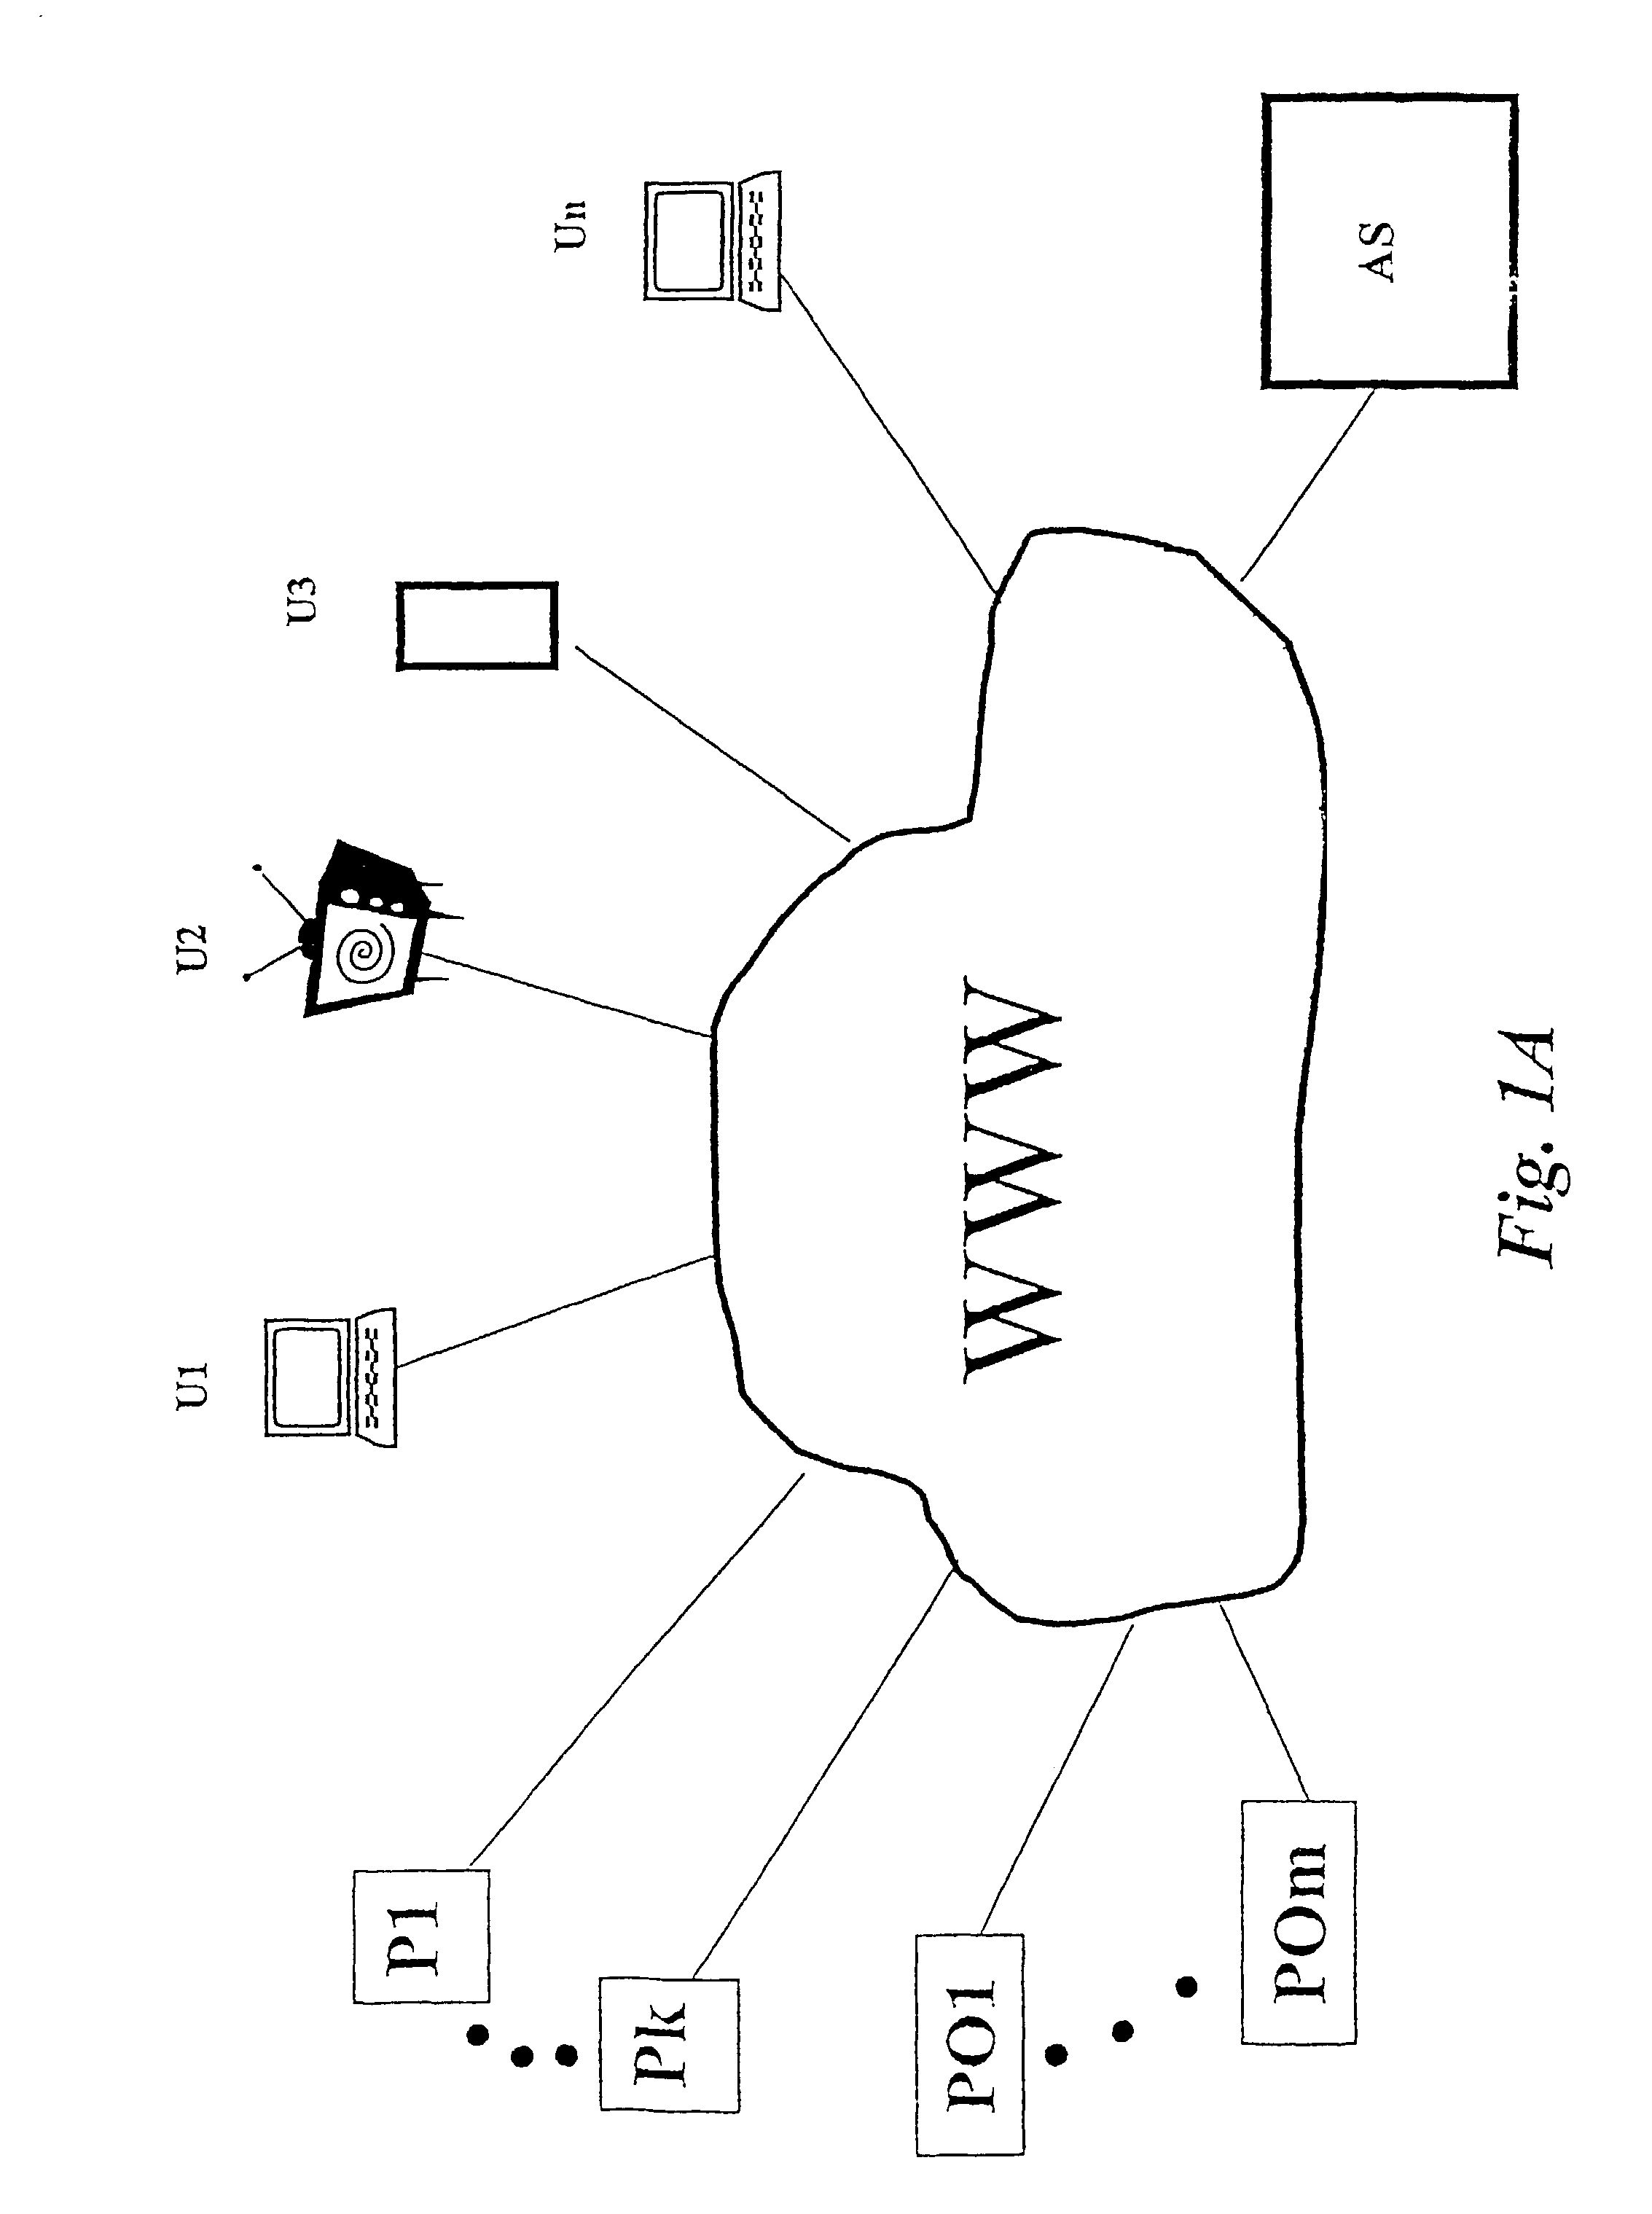 User-driven data network communication system and method